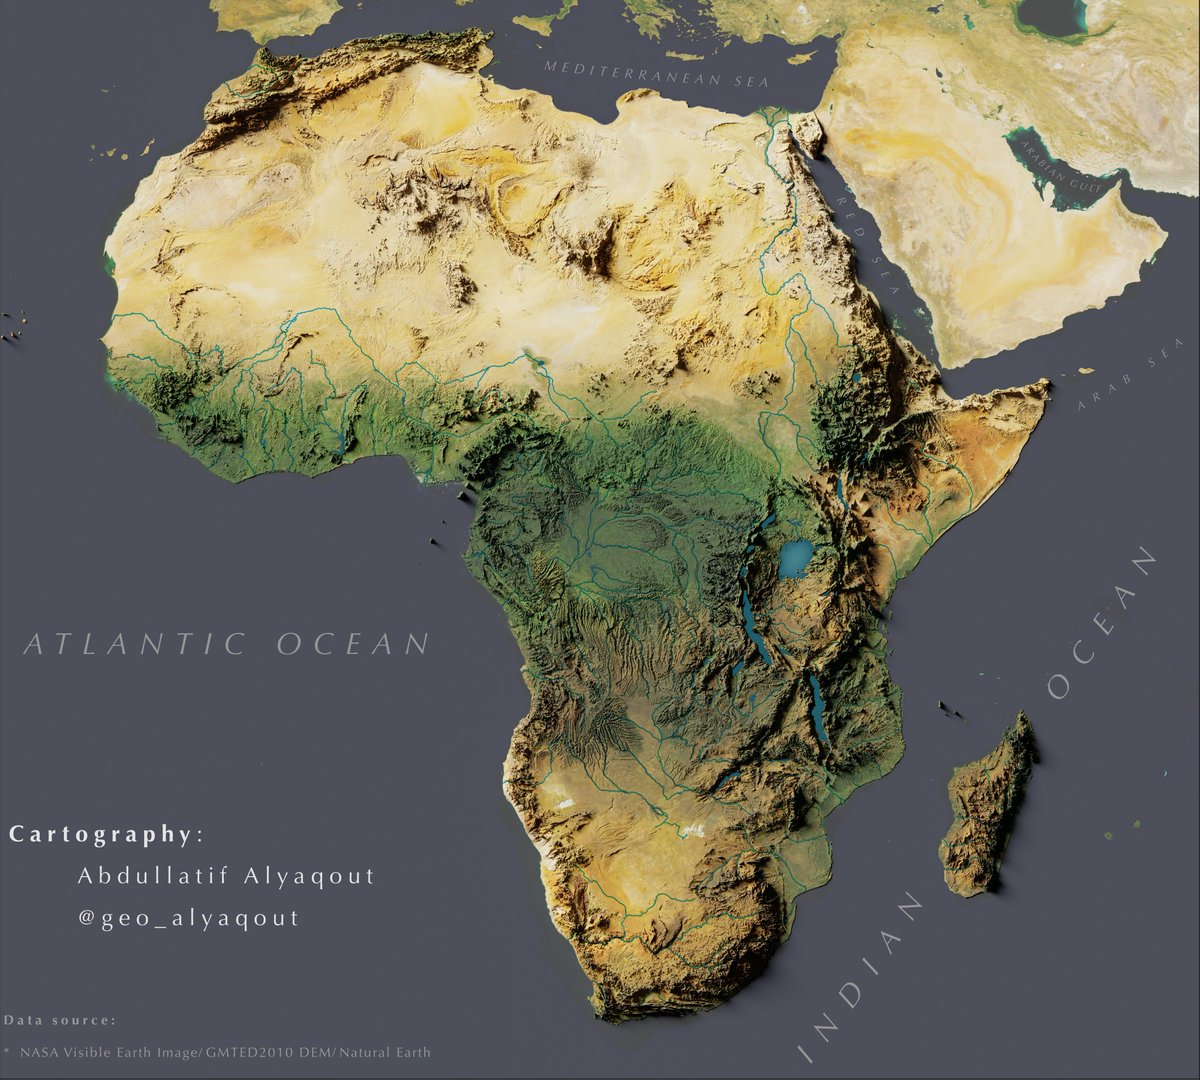 #30DayMapChallenge Africa relief map. A largely flat continent. Highlands are associated with the Rift valley in E. Africa, giving rise to Nile & Congo rivers. Fouta Djallon in the West, the Atlas mountains in N.W Africa and elevated South Africa are the other highlands.